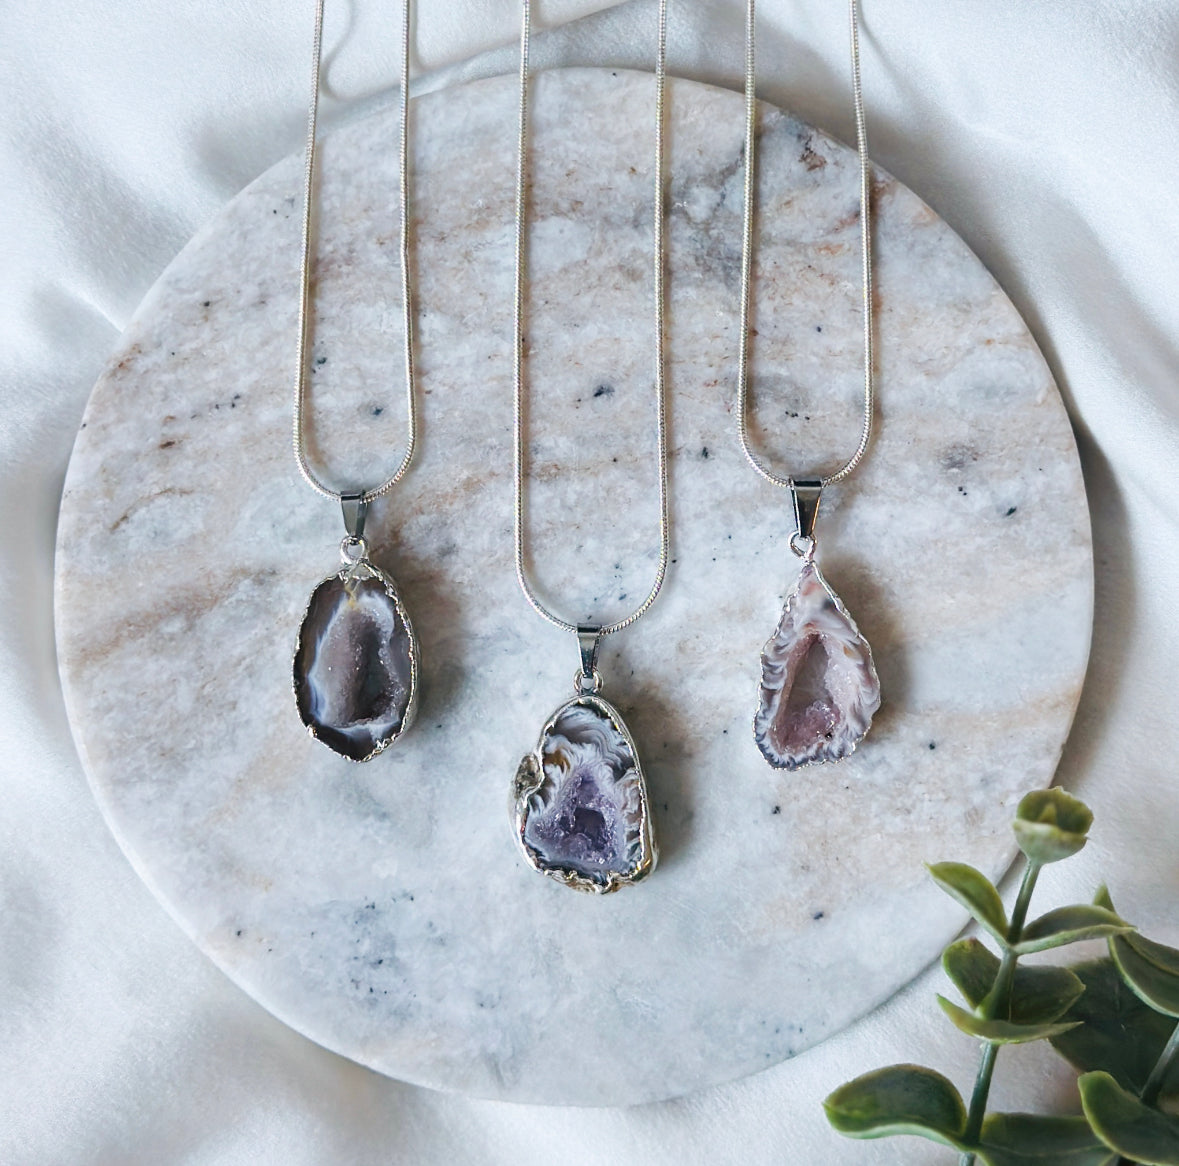 The Agate Geode Necklace.